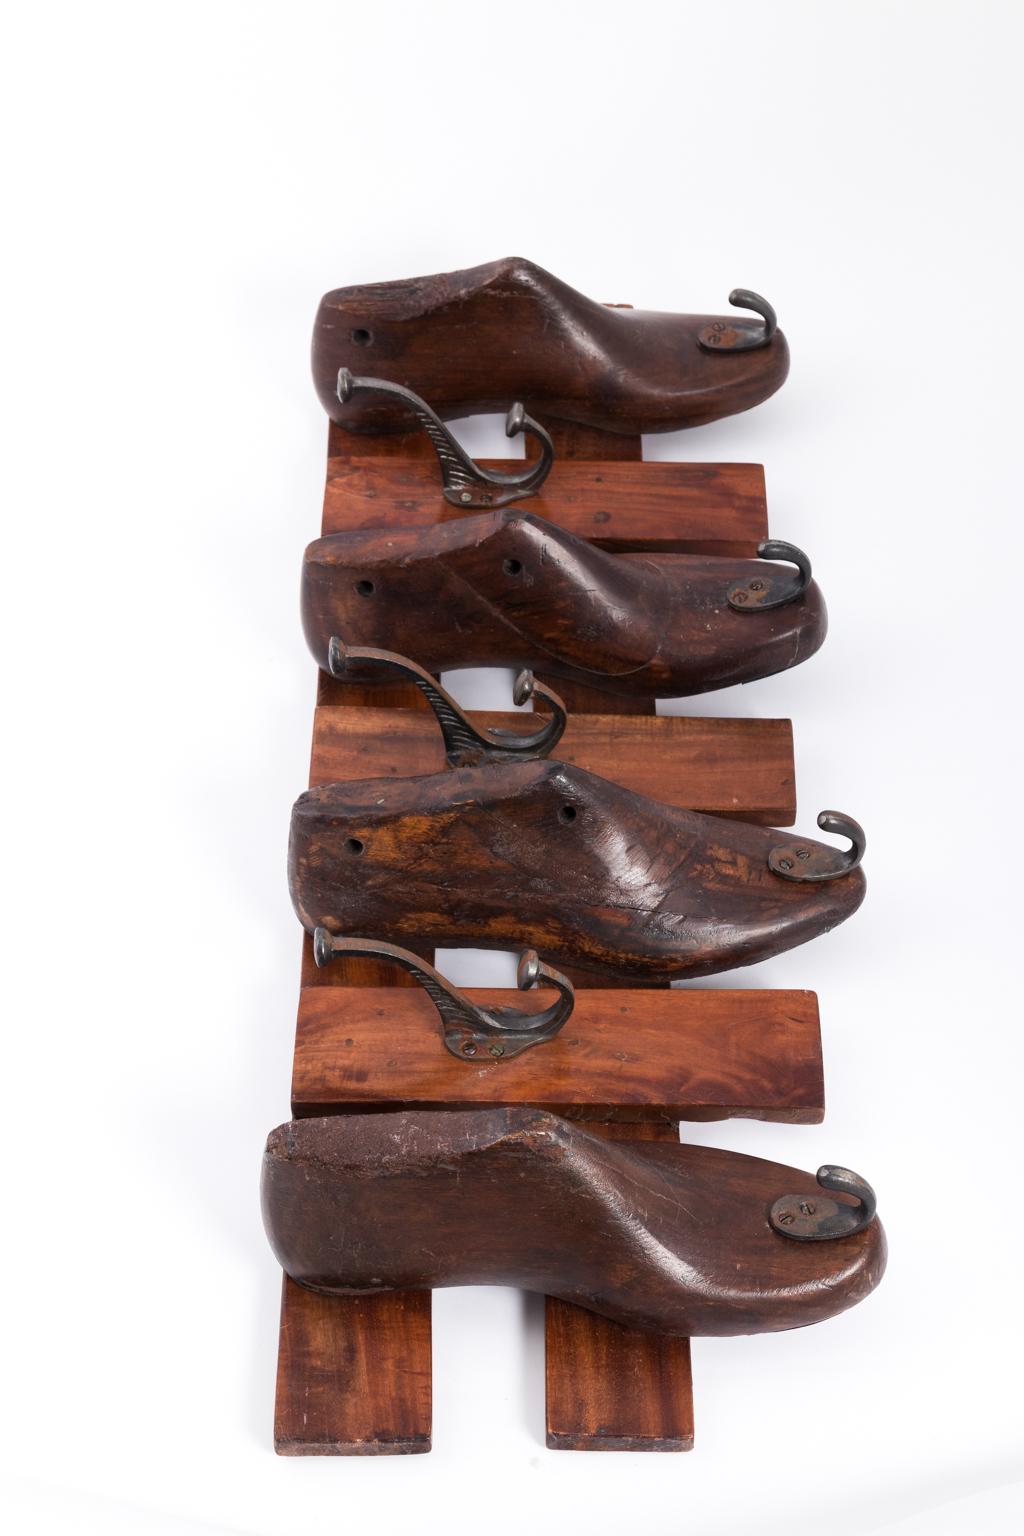 English coat track with hooks made of shoe inserts on two wooden boards, circa 1930s.
   